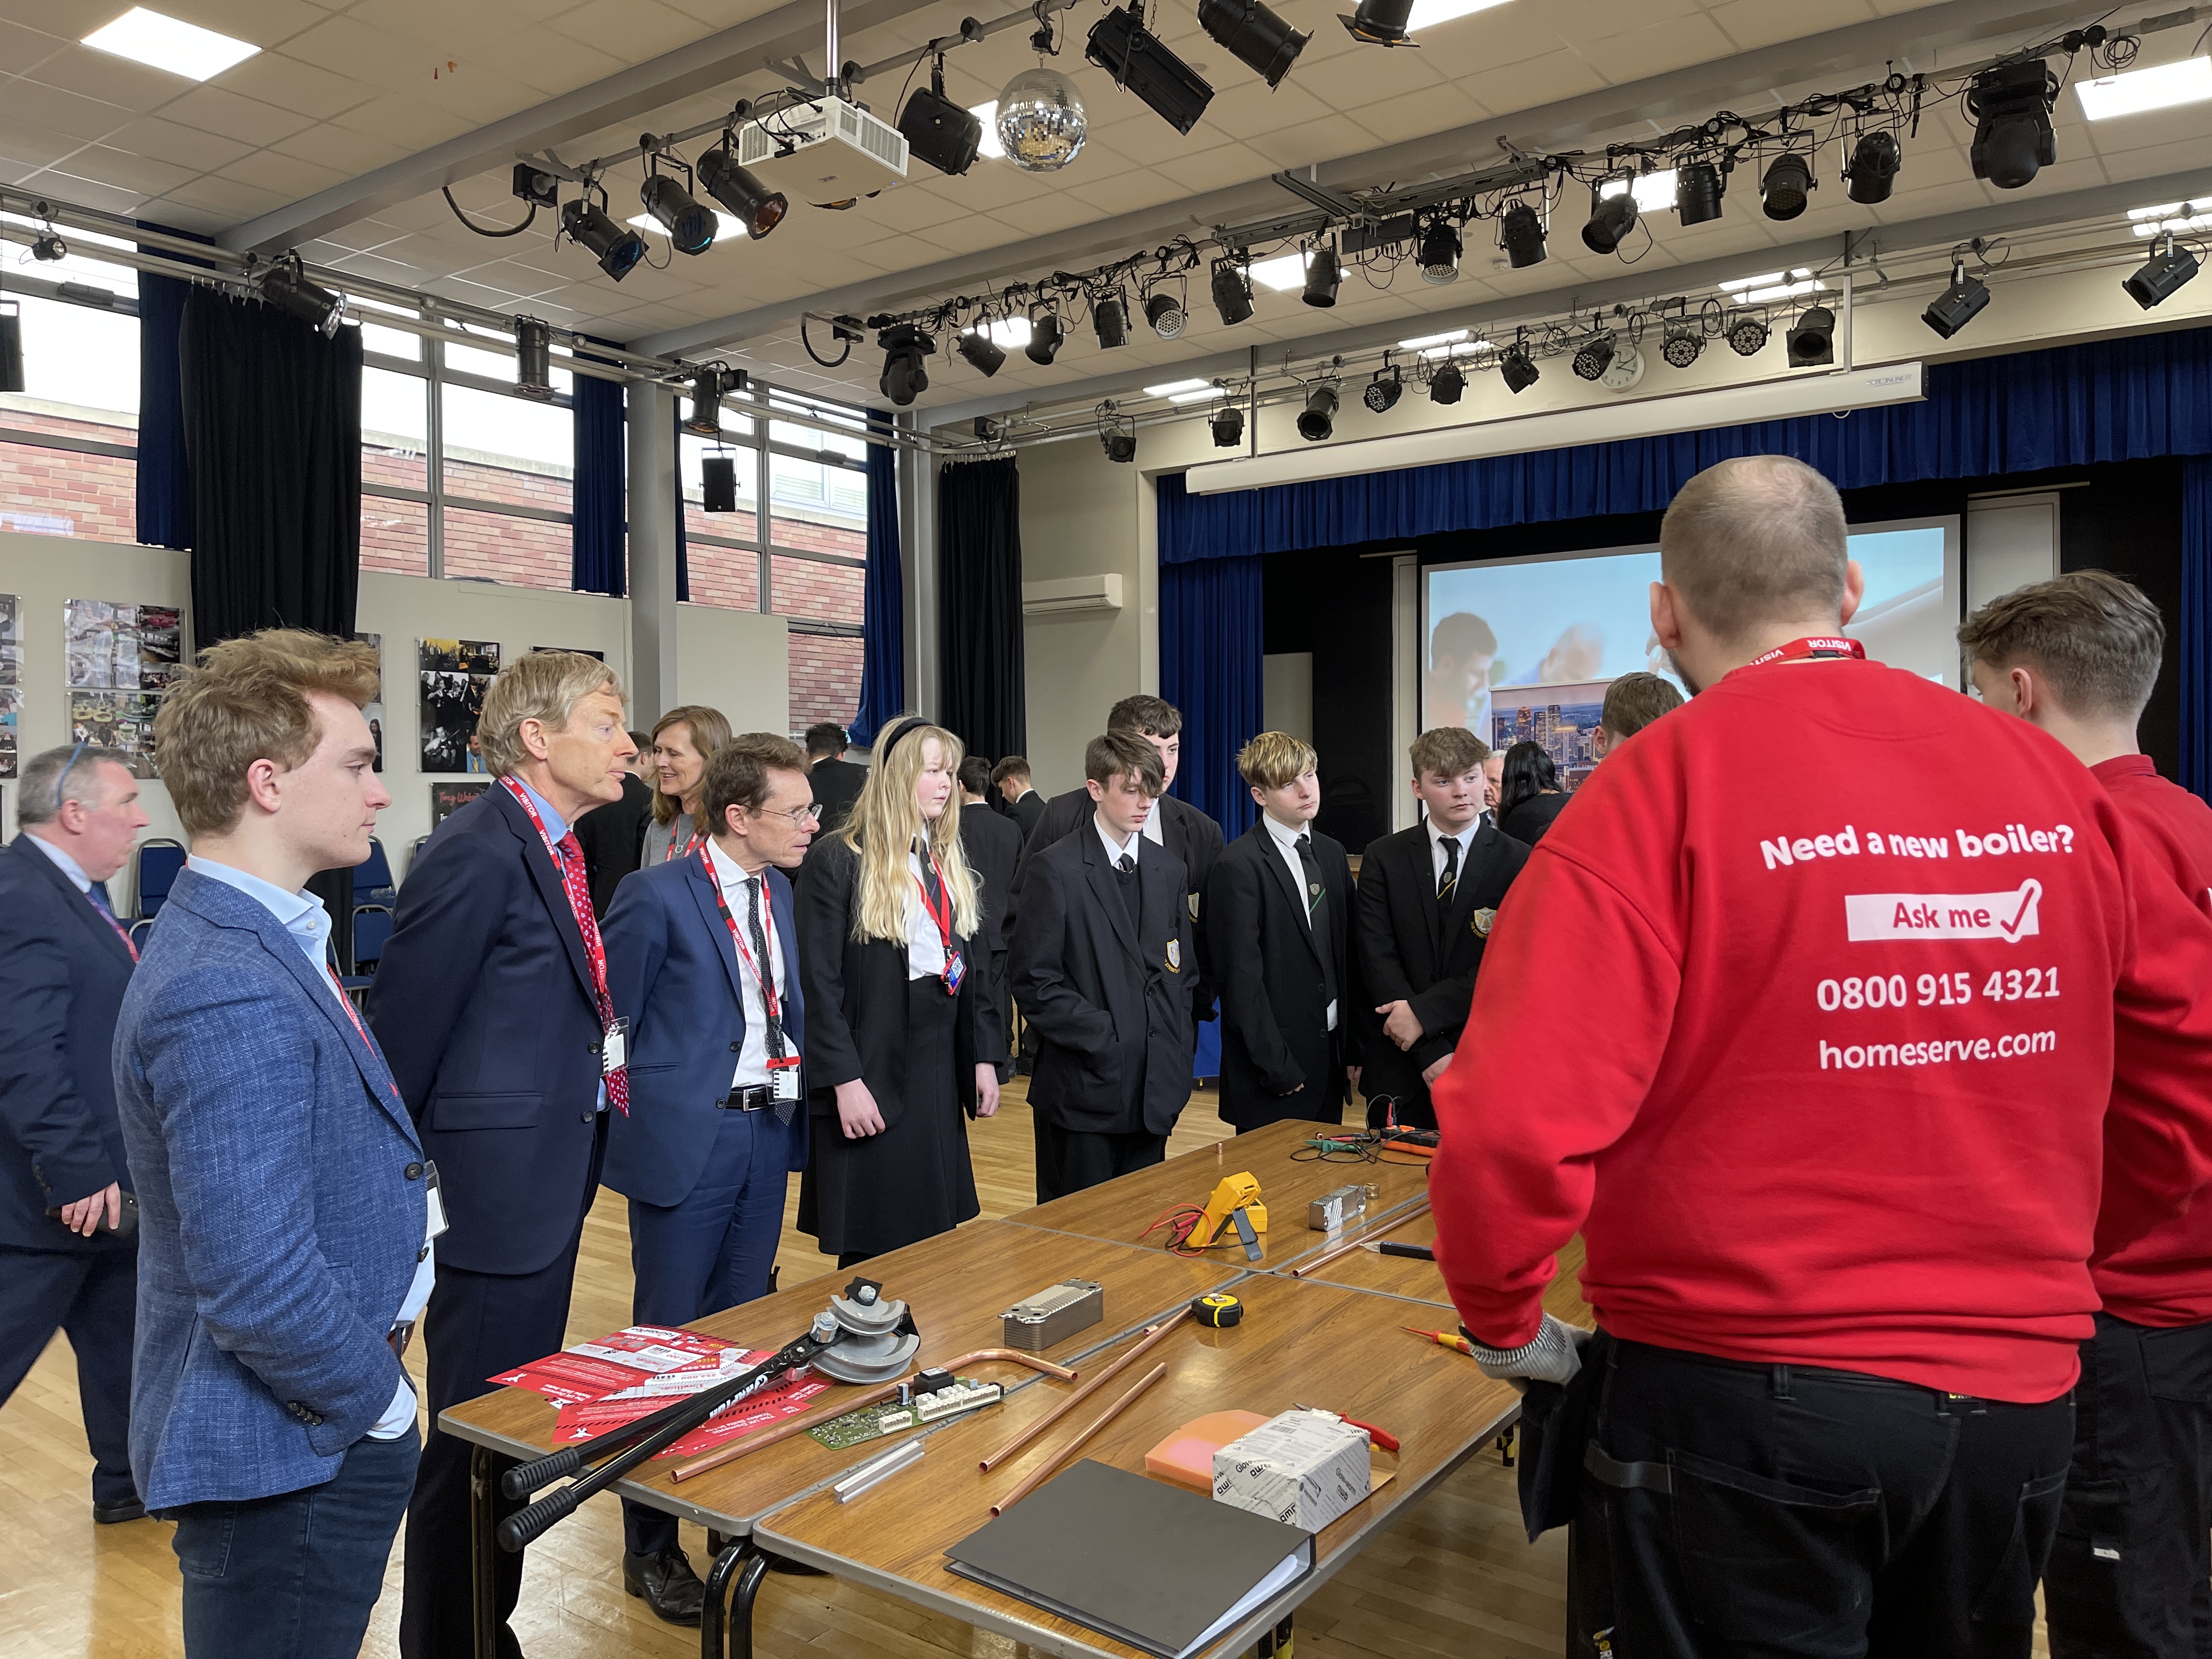 Andy Street, the Mayor of the West Midlands meets  HomeServe Plc CEO Richard Harpin, who were joined by pupils from the Streetly Academy, one of 15 schools in the West Midlands to take part, to officially launch the project in Sutton Coldfield.